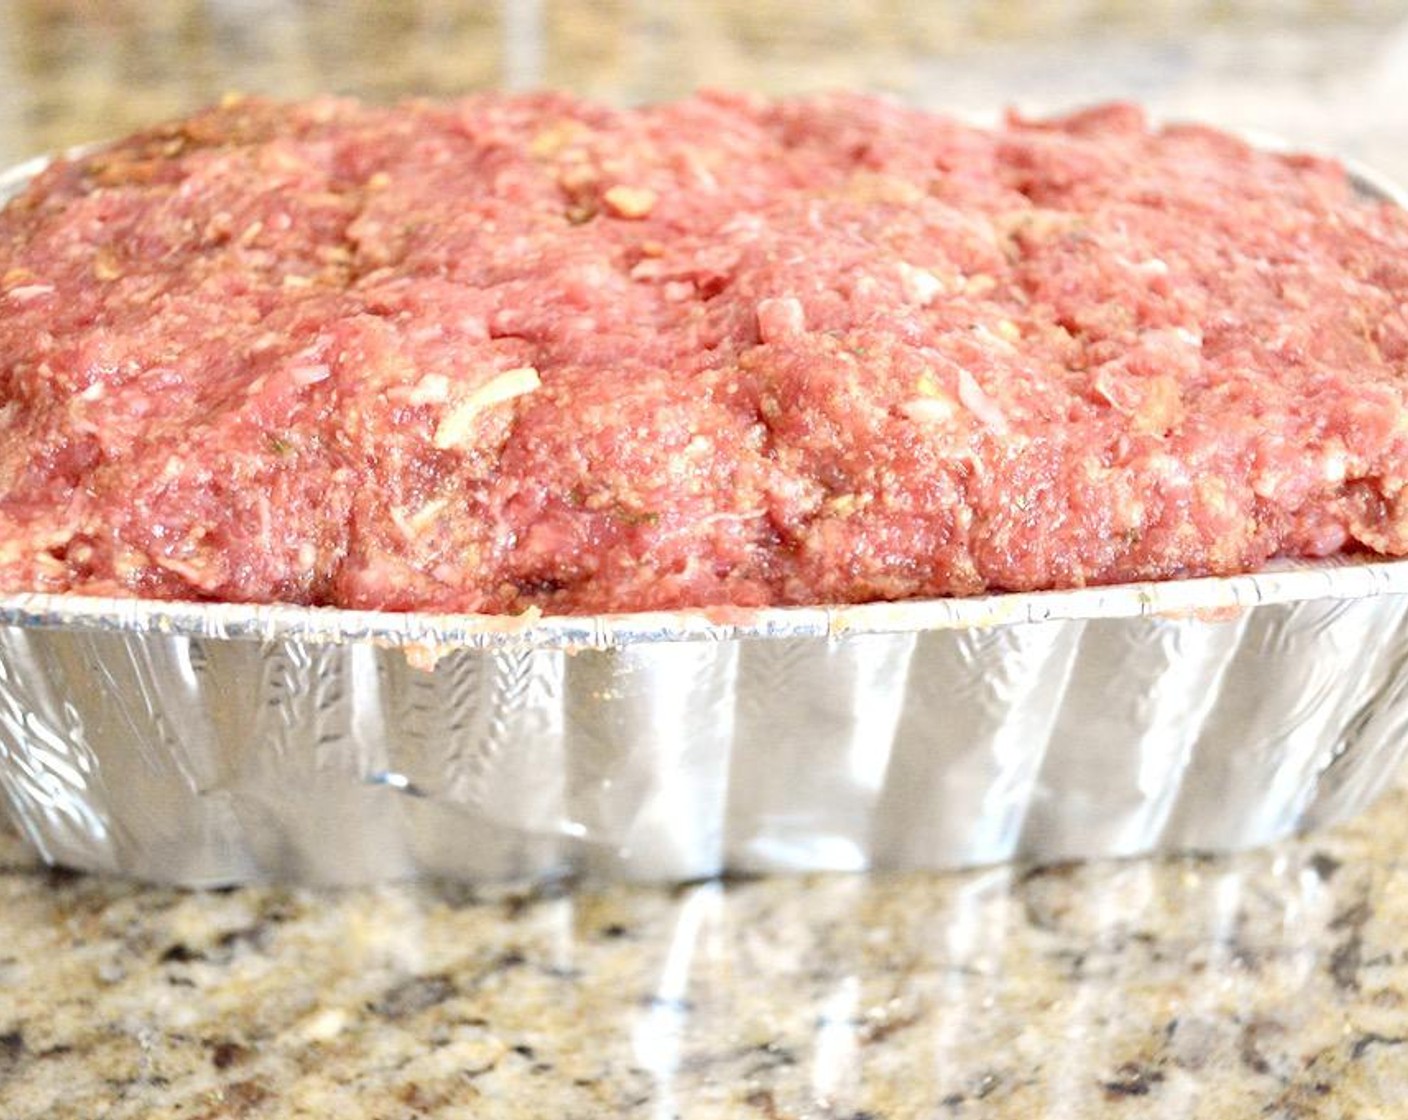 step 2 Get a loaf pan, and combine the Ground Beef (2 lb), Seasoned Breadcrumbs (2/3 cup), Onion Soup and Dip Mix (1 packet), Eggs (2), McCormick® Garlic Powder (1 pinch), Salt (1 pinch), and Freshly Ground Black Pepper (1 pinch) in a bowl and use your clean hands to thoroughly mix it together. Press the mixture firmly into the loaf pan and put the full loaf pan on the sheet tray.